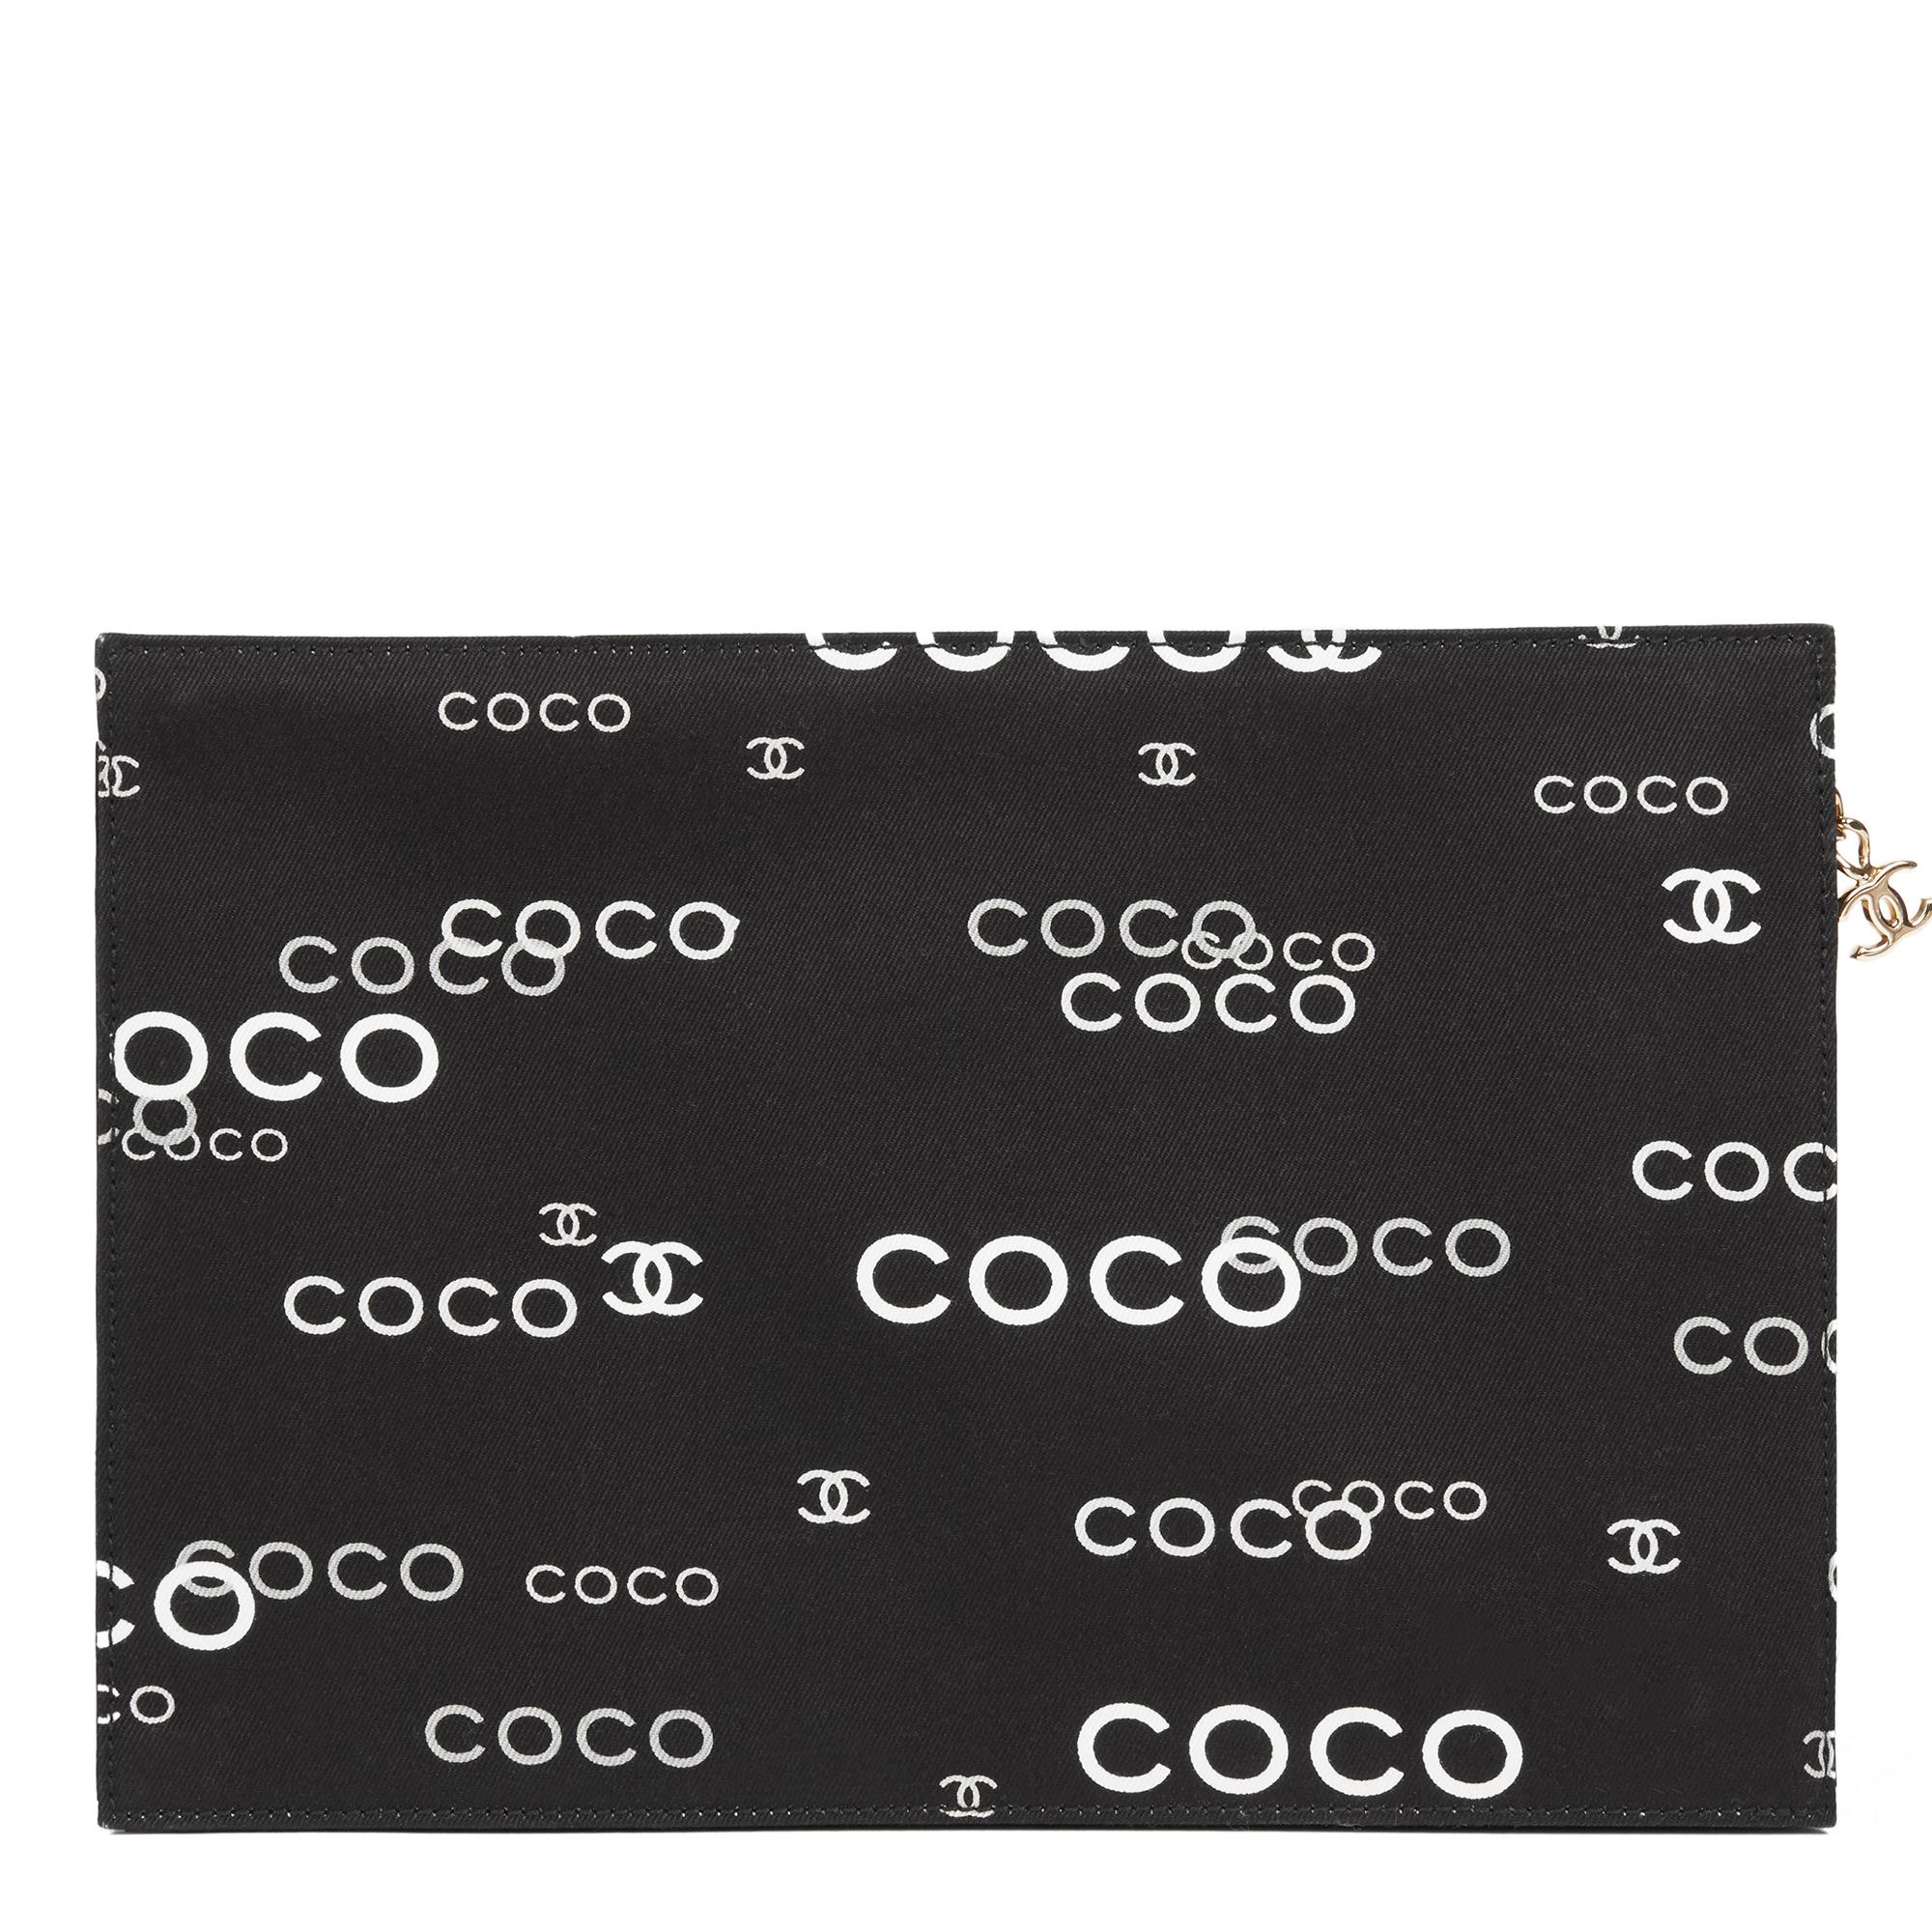 CHANEL
Black Canvas Coco Pouch

Reference: HB2720
Serial Number: 7219494
Age (Circa): 2002
Accompanied By: Care Booklet
Authenticity Details: Serial Sticker (Made in Italy)
Gender: Ladies
Type: Accessory, Clutch

Colour: Black
Hardware: